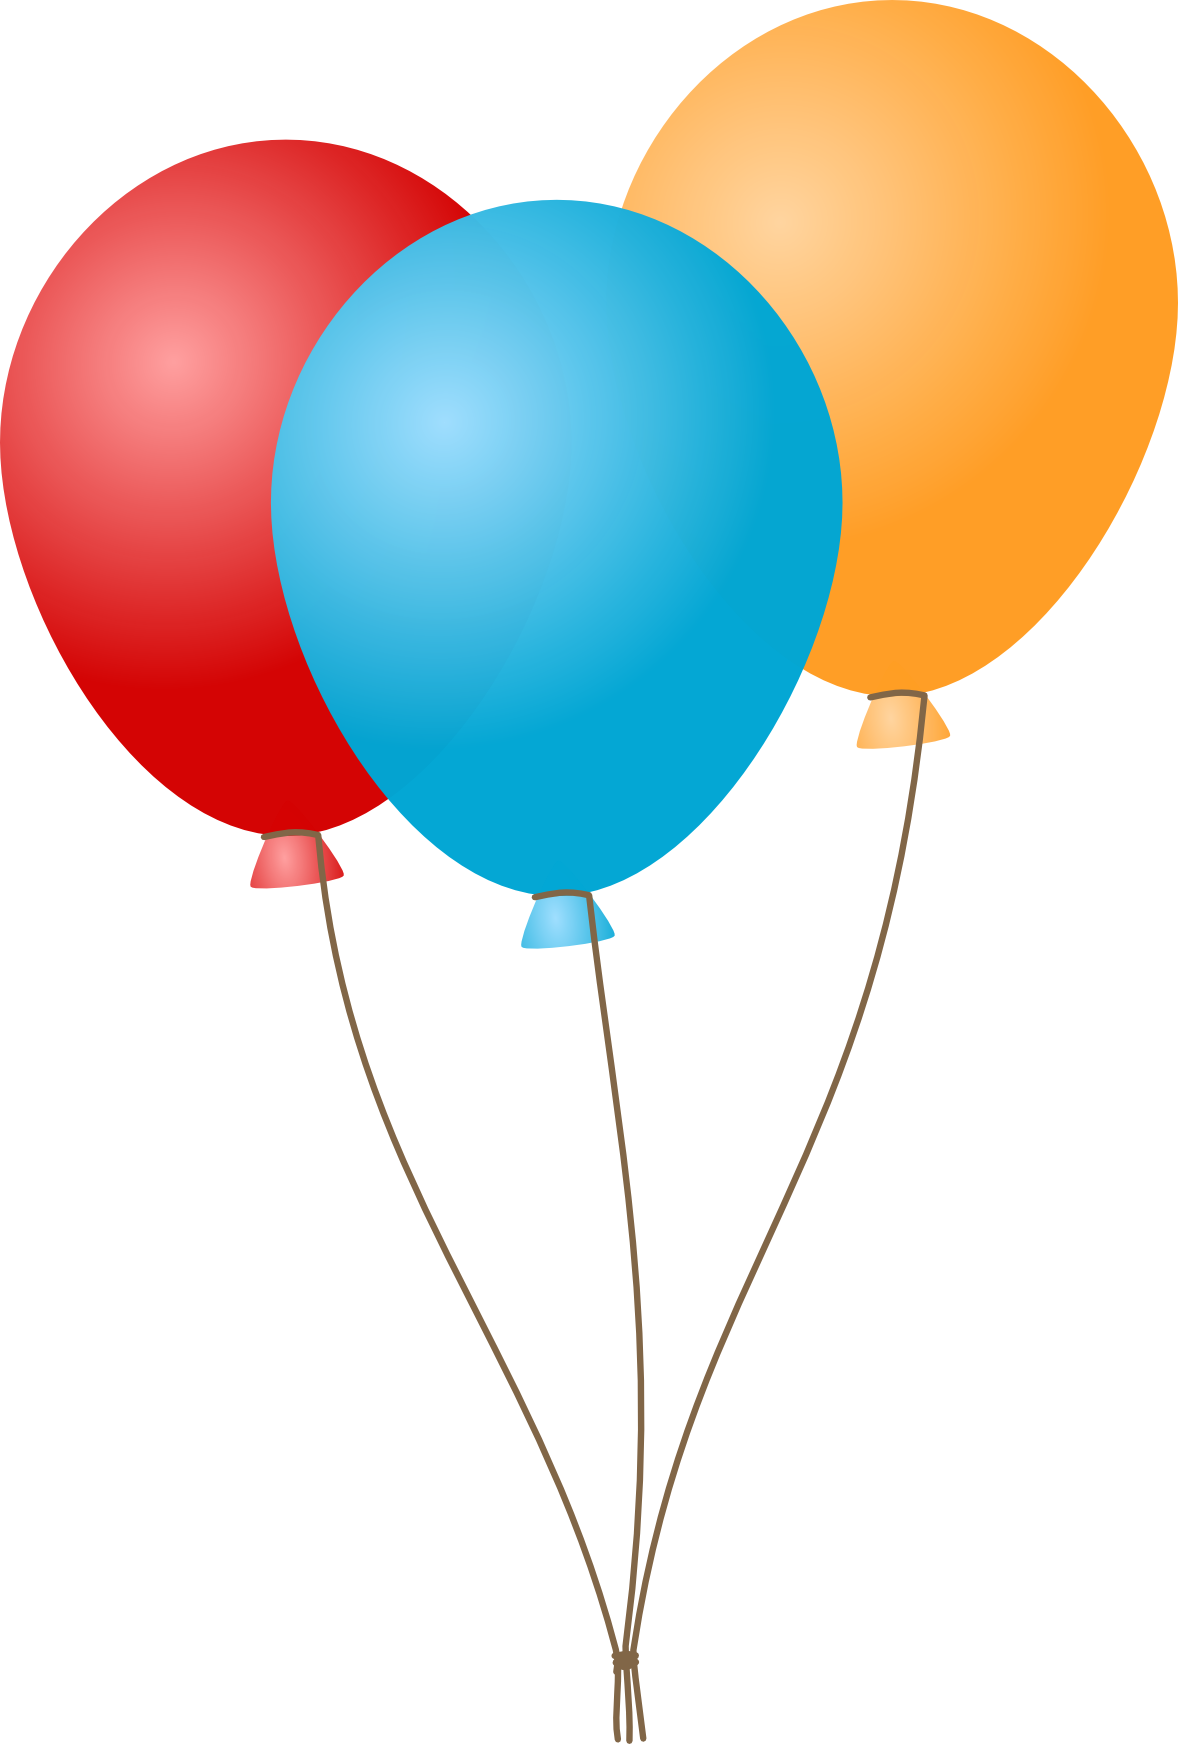 Balloons Png 5 PNG Image